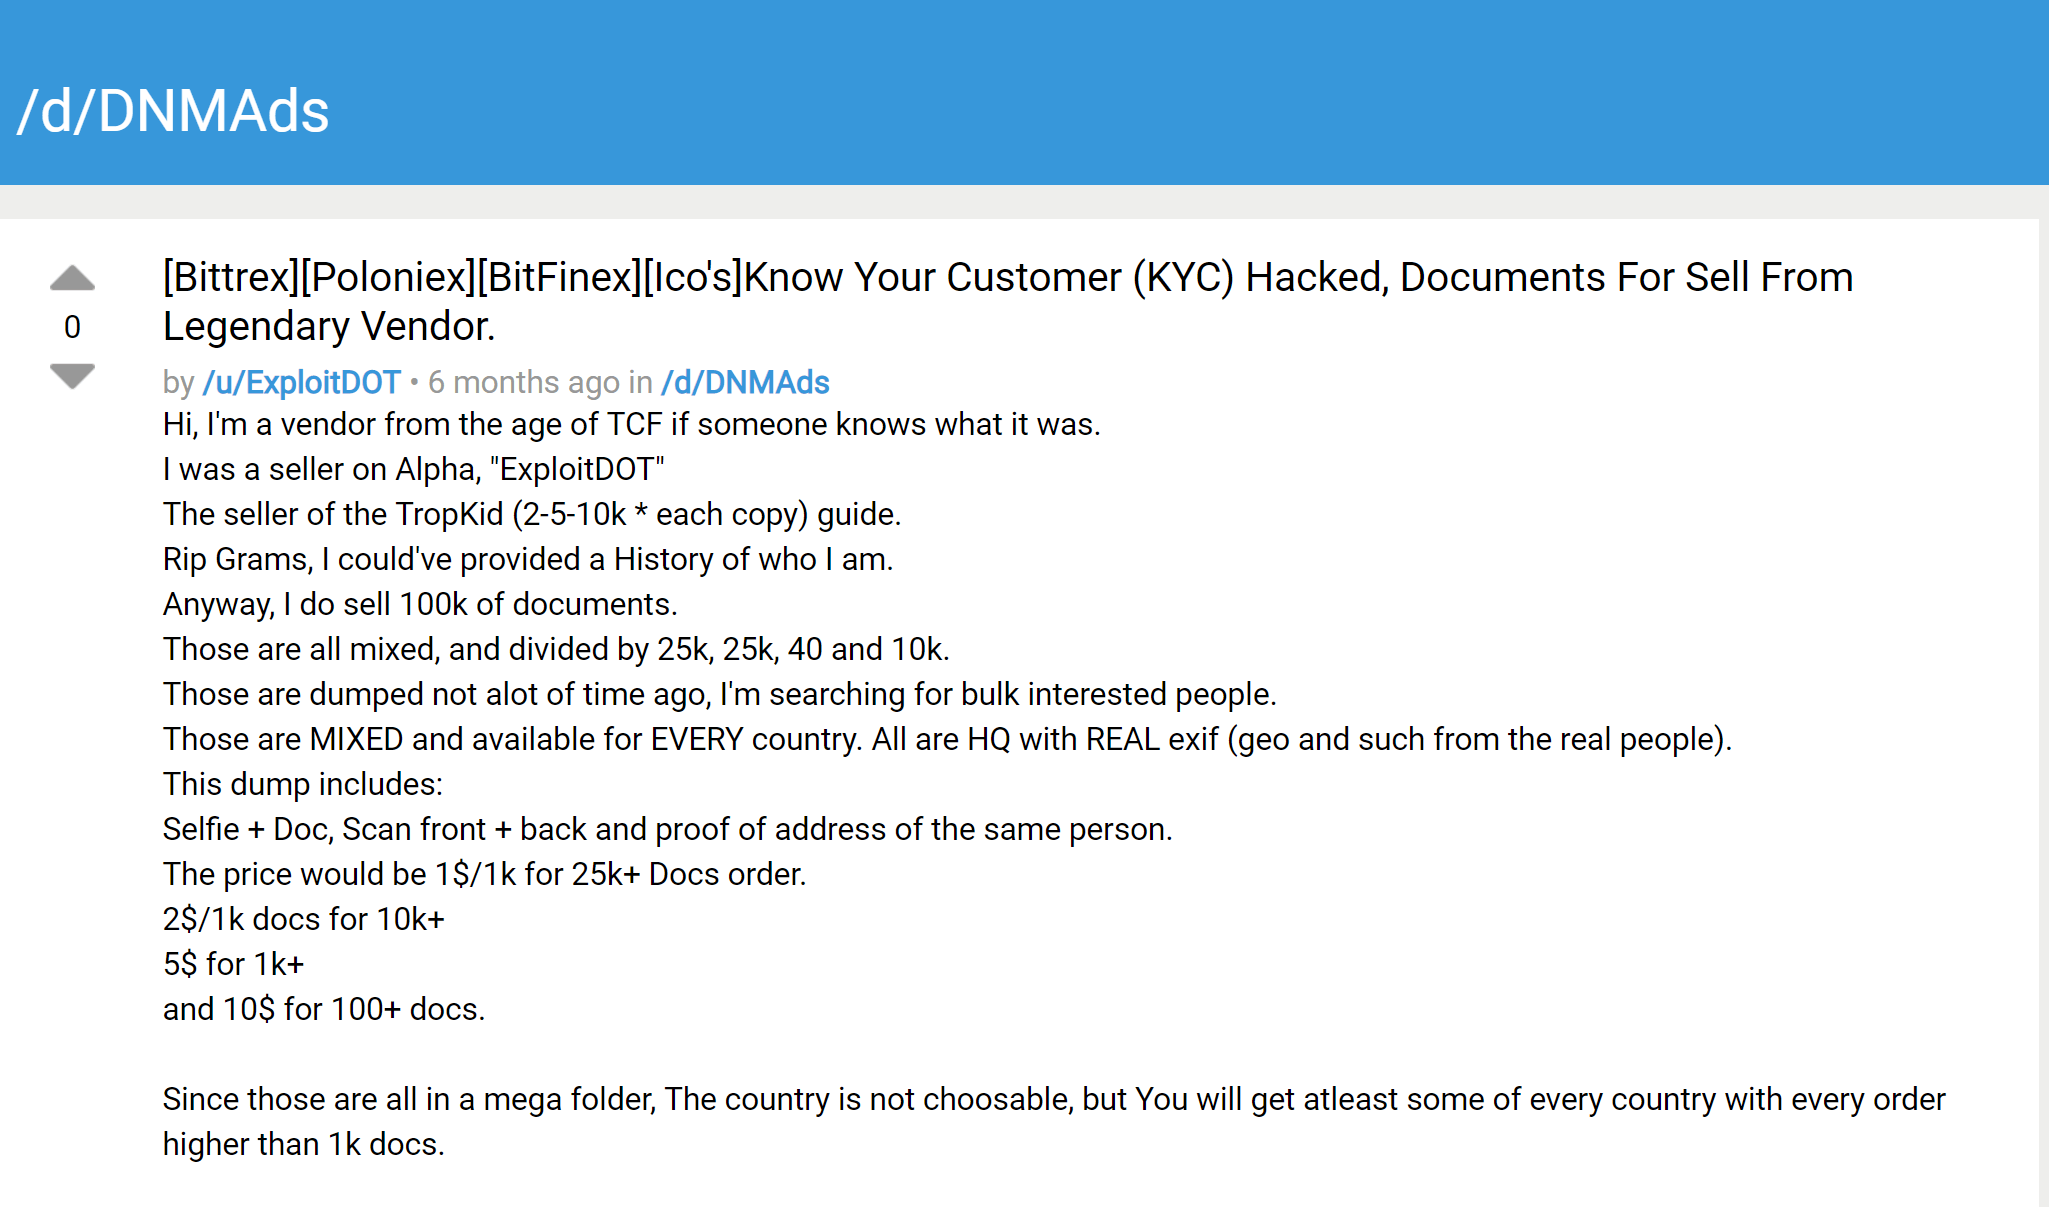 A post on darknet market "Dread" advertising the hacked KYC documents' sale